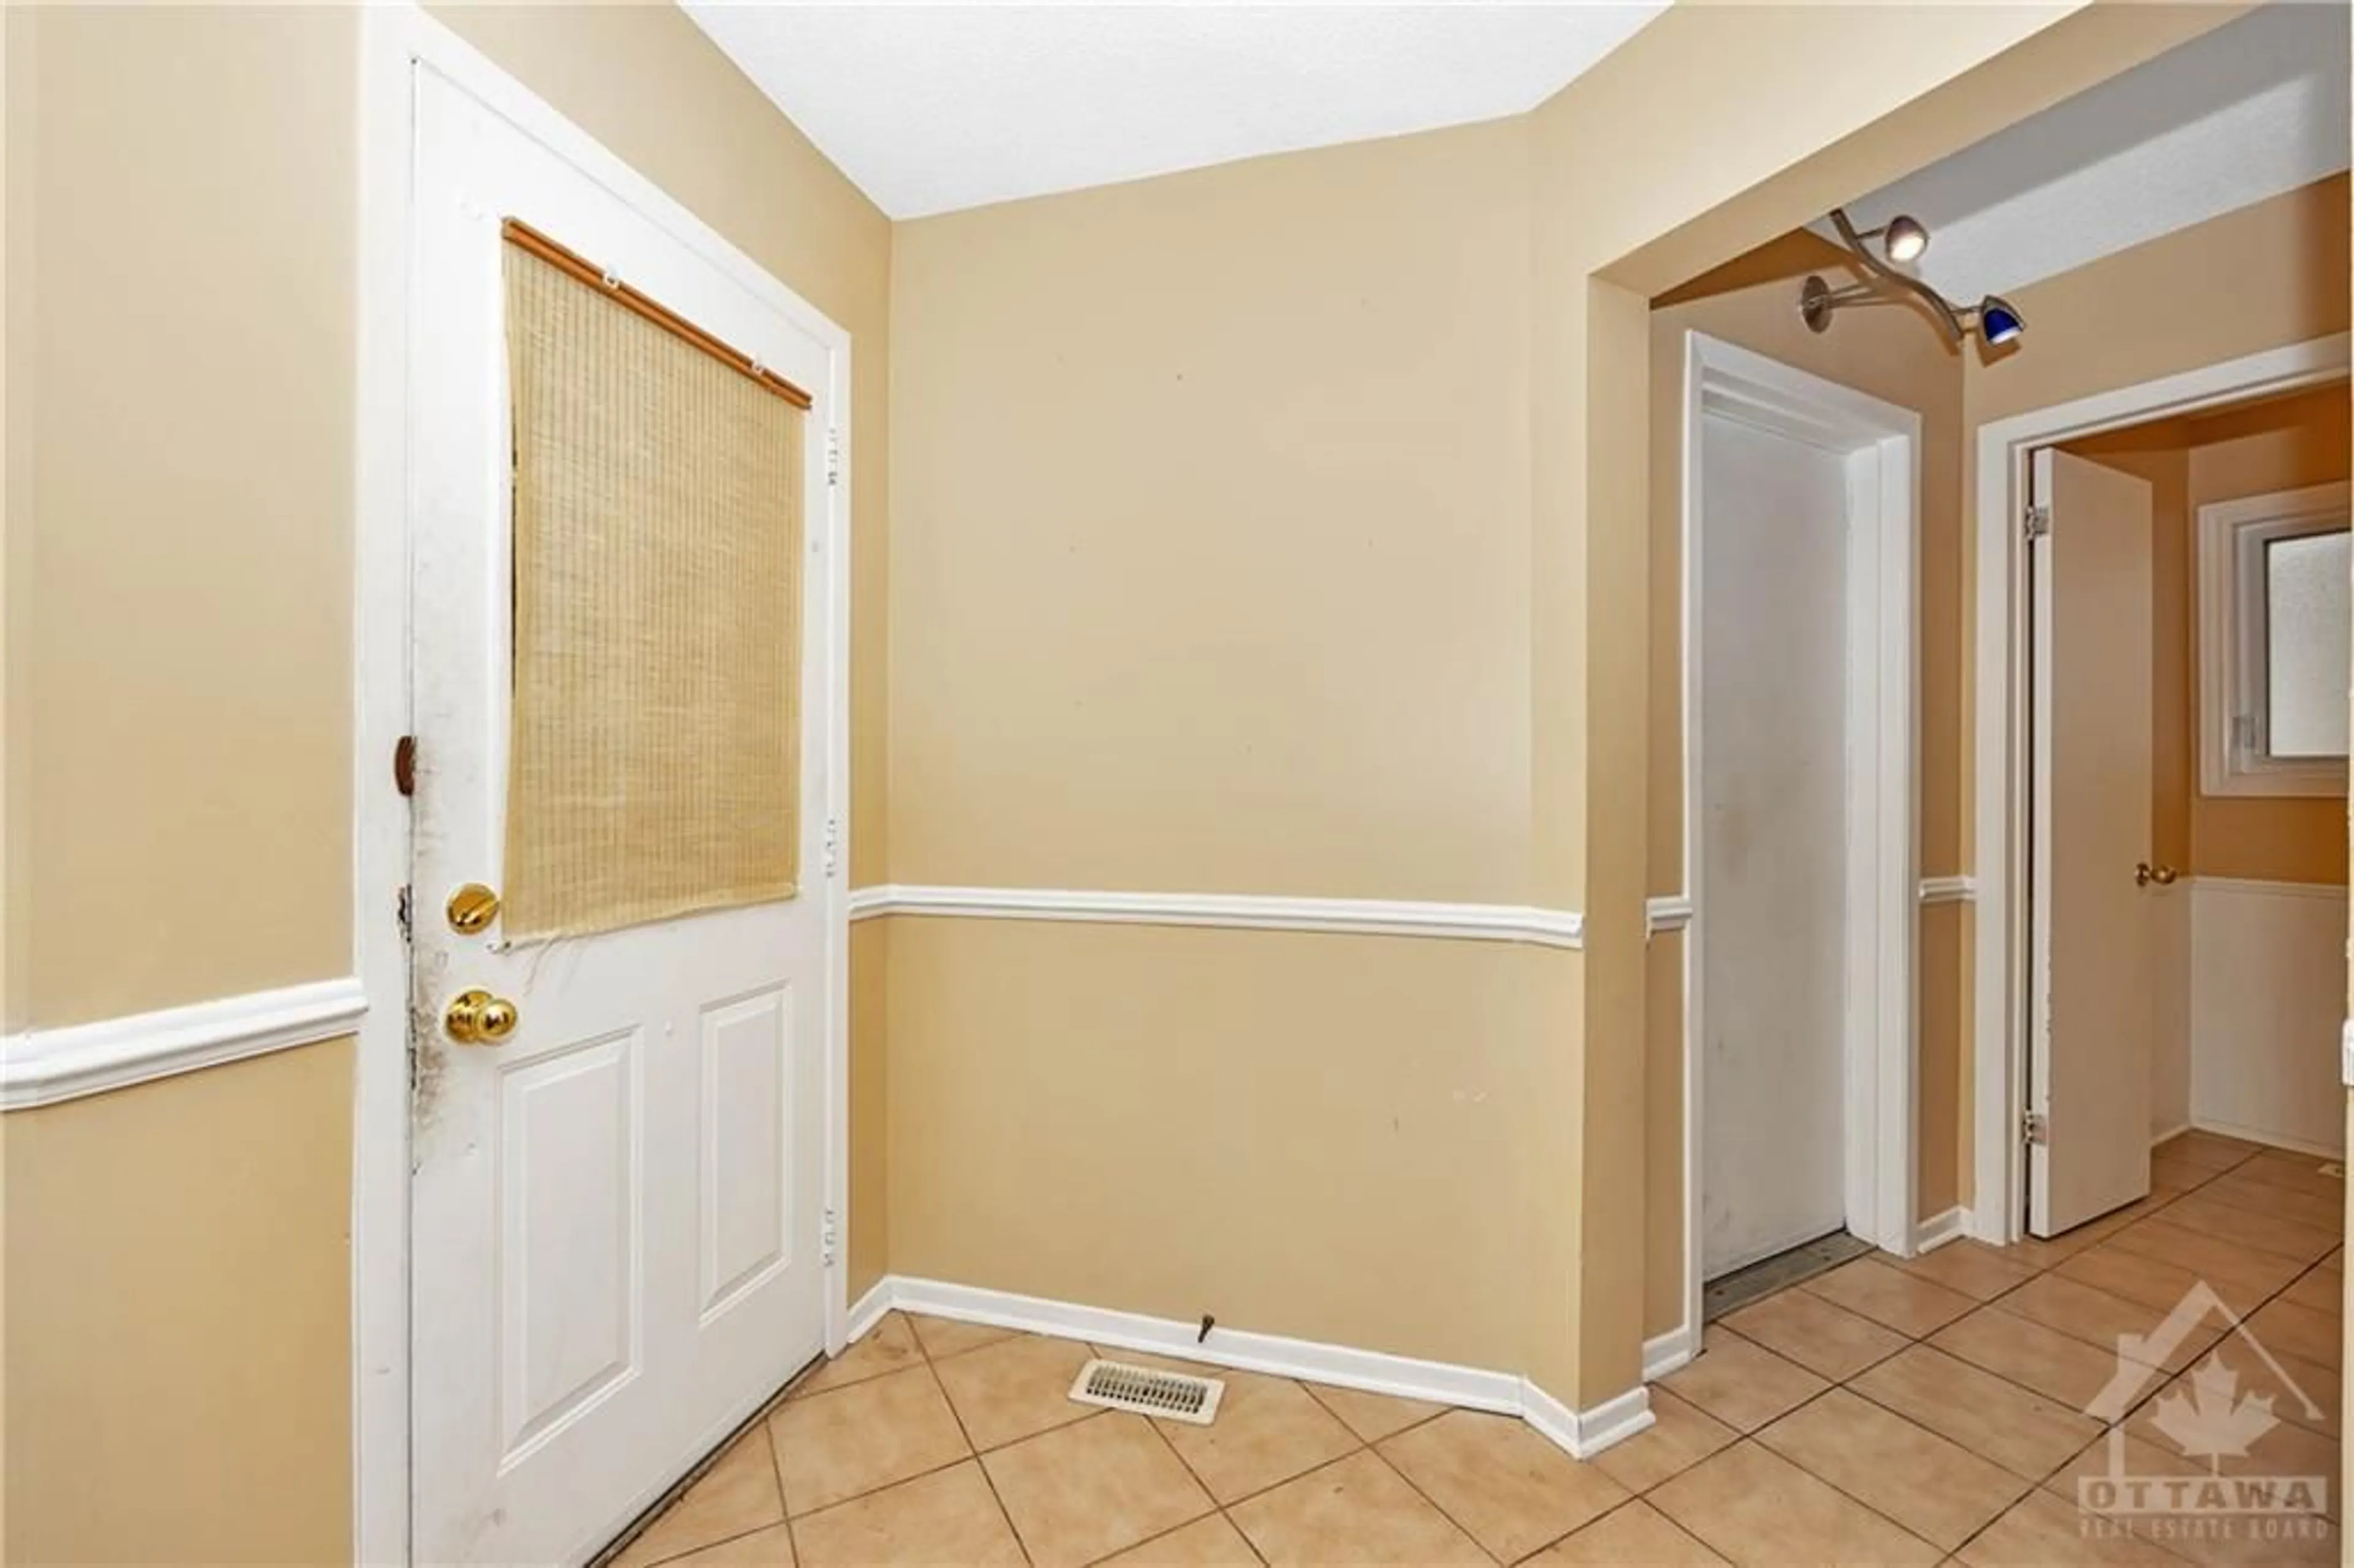 Indoor entryway for 1407 LAURIN Cres, Ottawa Ontario K1E 3H2